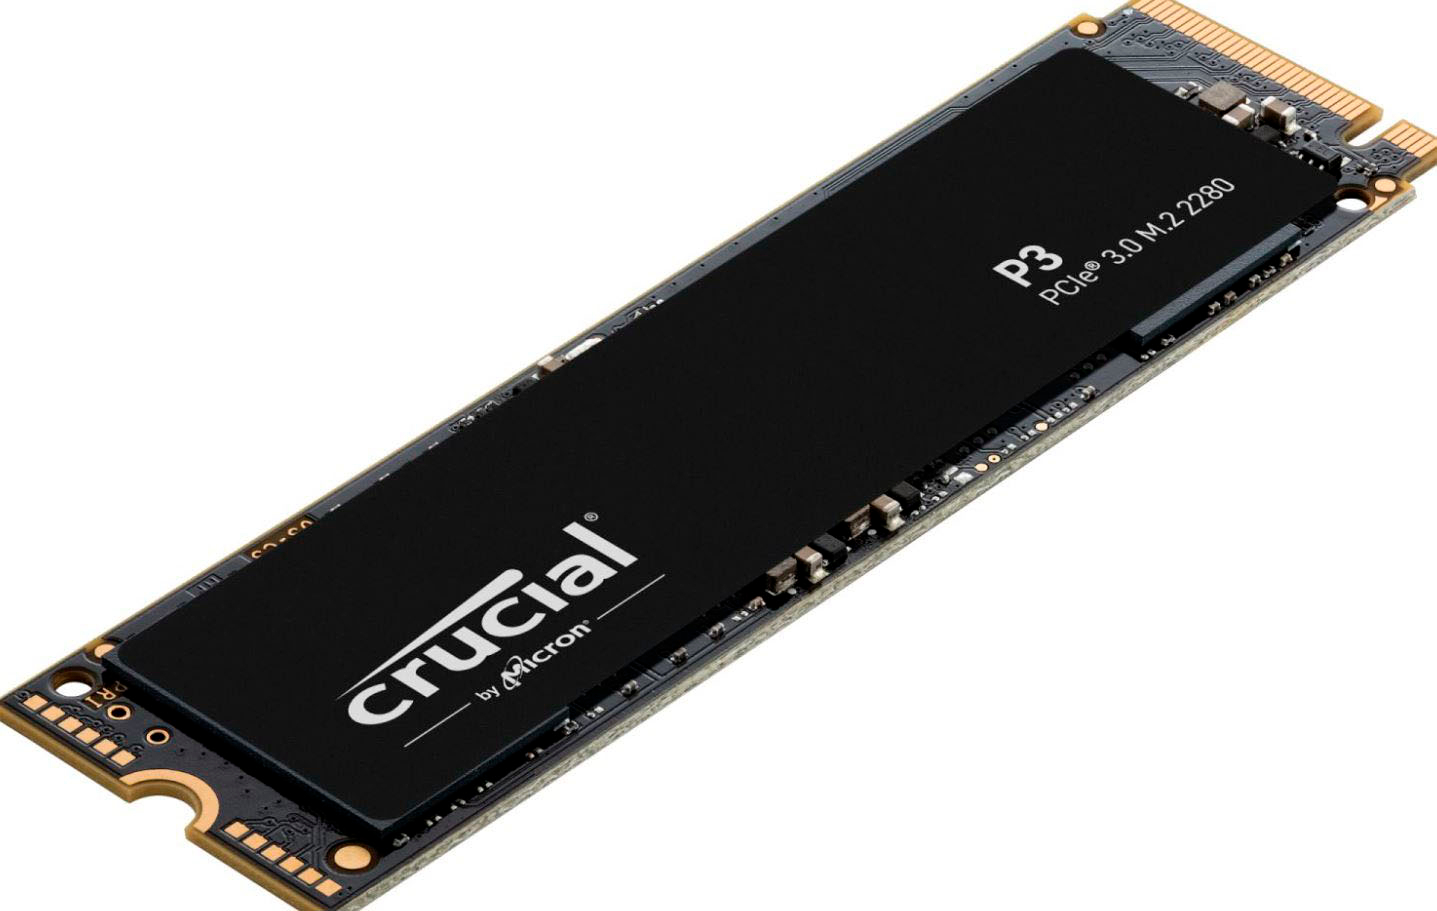 CRUCIAL P2 SSD 500 Go 3D NAND NVMe™ PCIe M.2 2280SS (CT500P2SSD8